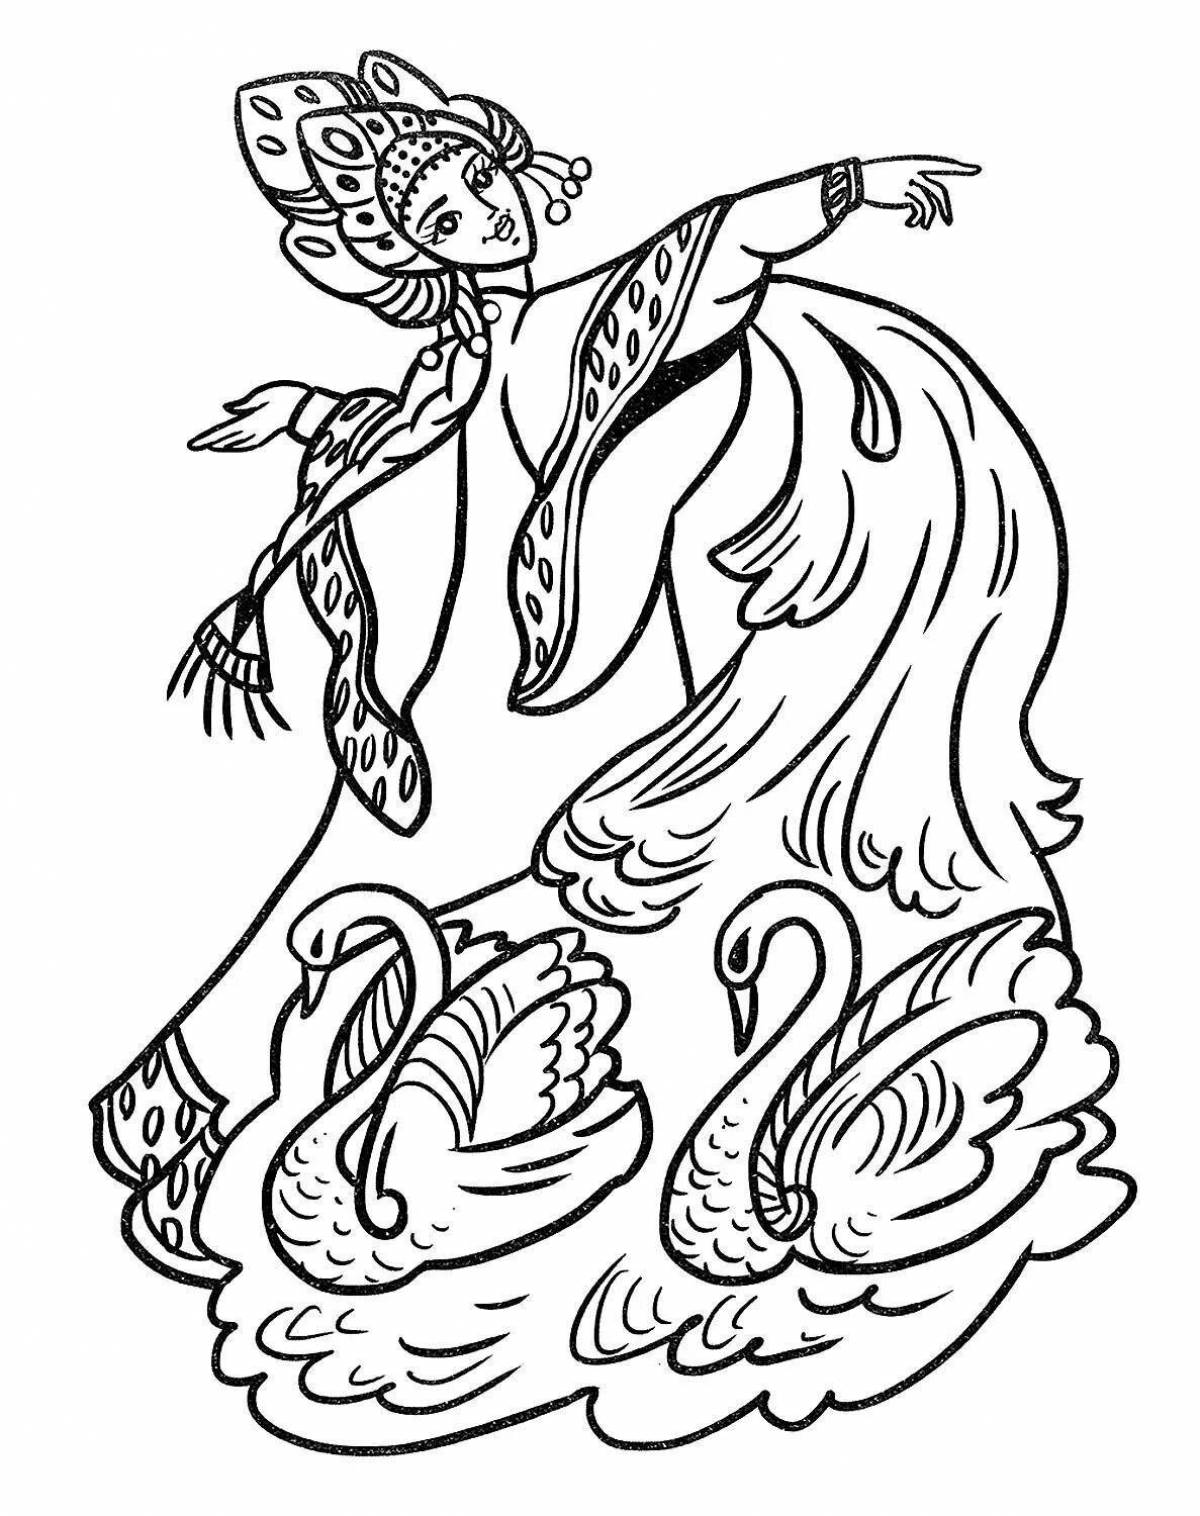 Coloring book radiant Ivan Tsarevich and the Firebird